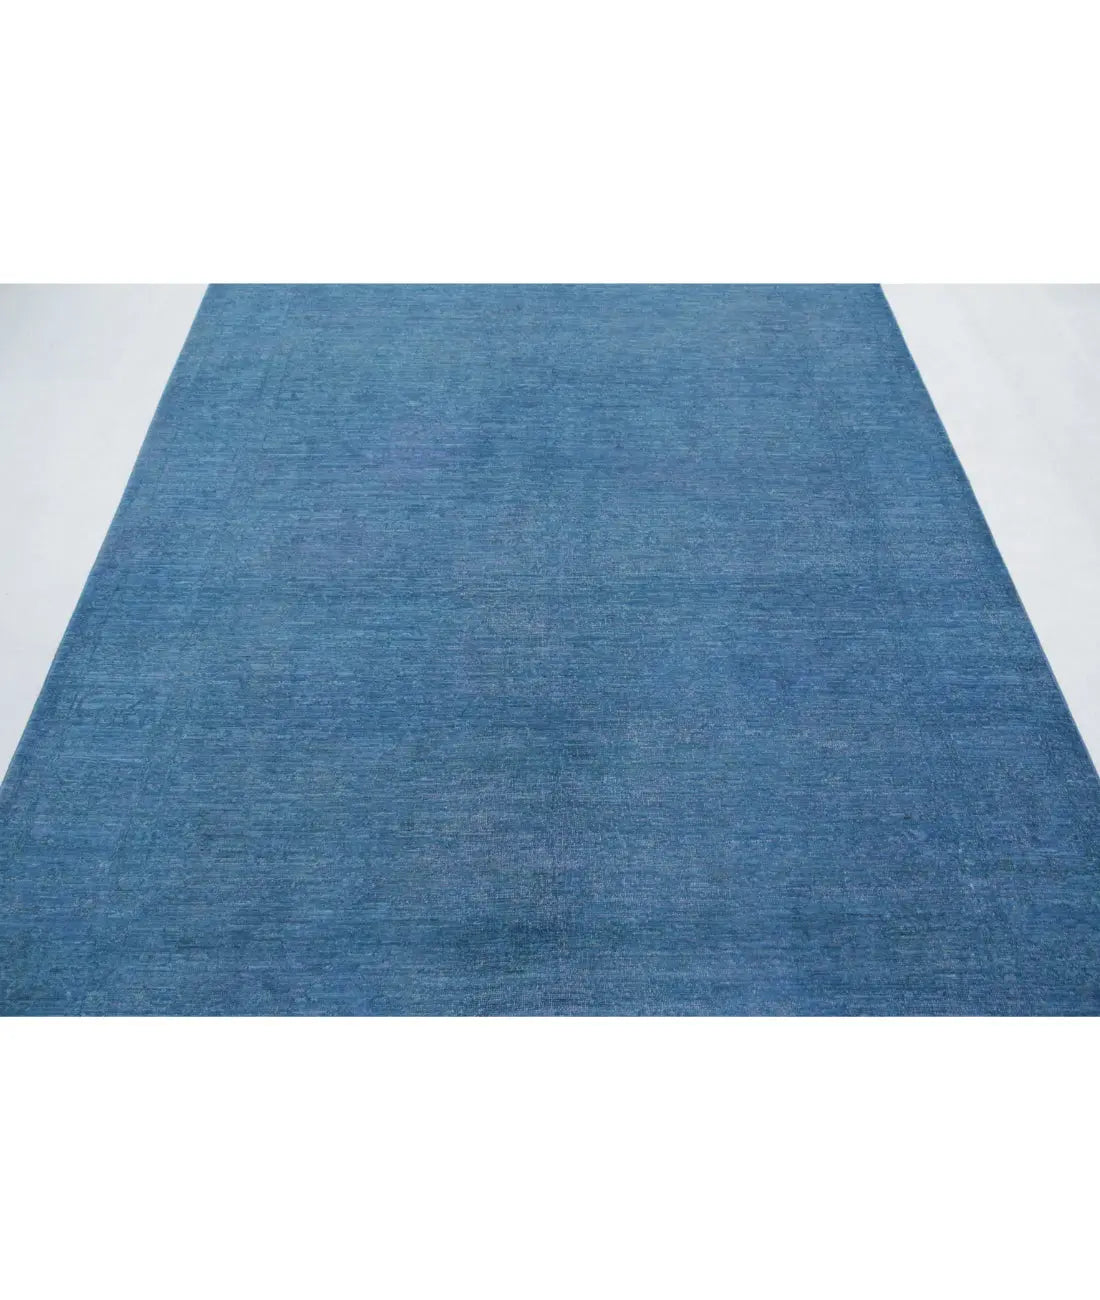 Hand Knotted Overdye Wool Rug - 6'2'' x 8'4''